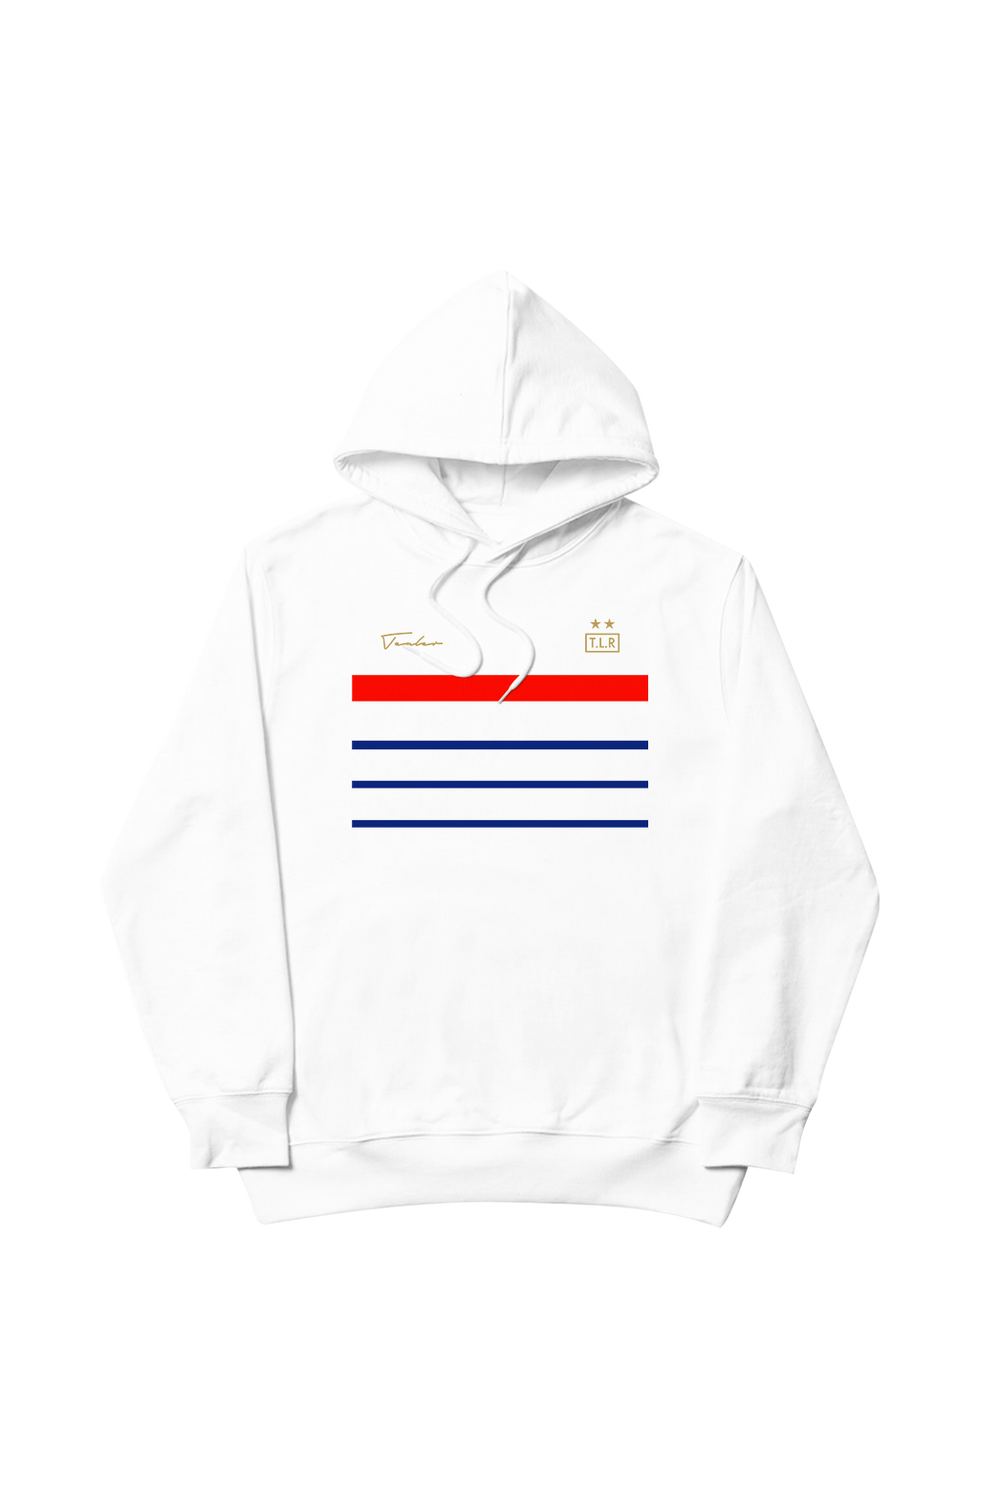 Tealer Coupe du monde france fifa maillot, Hoodie White